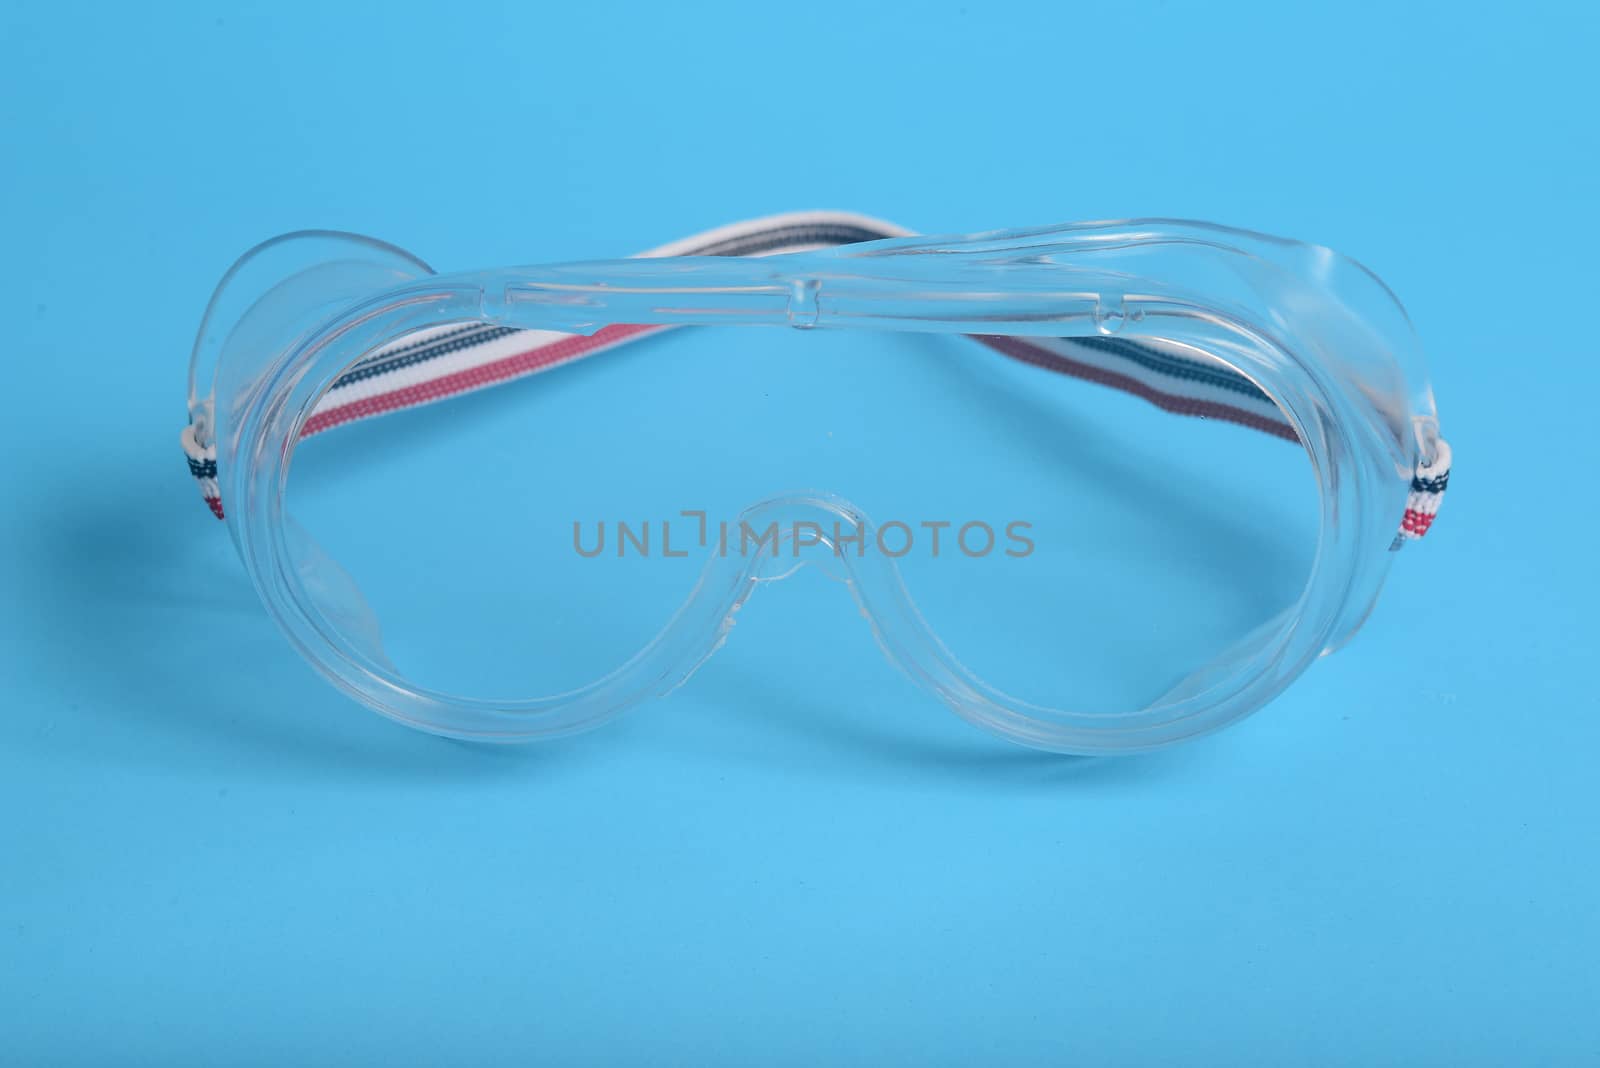 transparent plastic laboratory glasses on blue background by ideation90